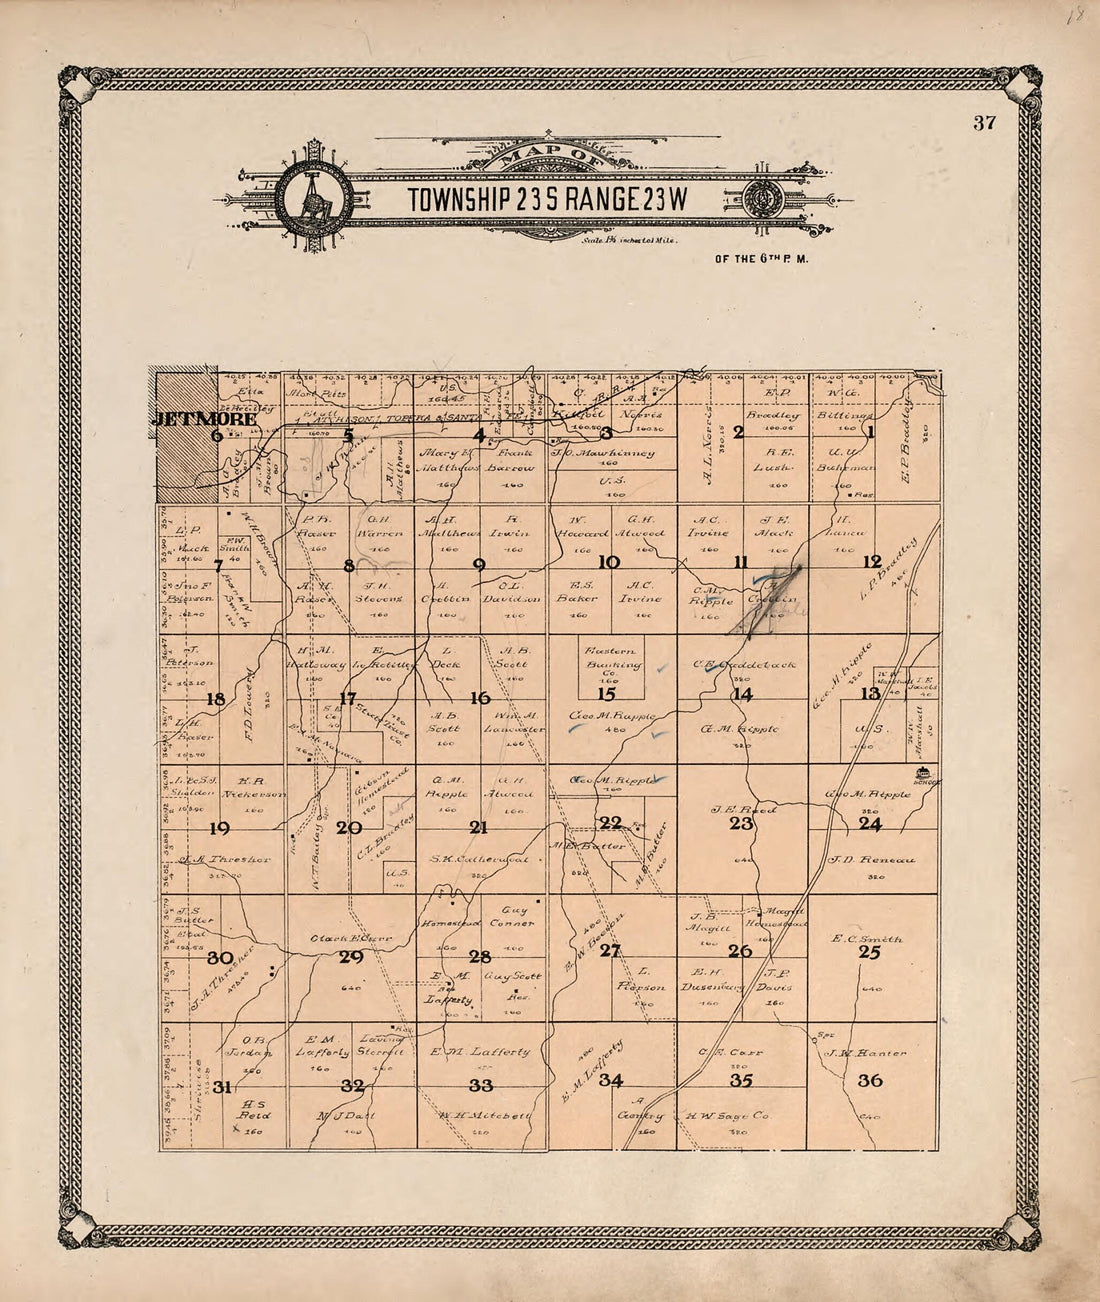 This old map of Map of Township 23 S Range 23 W from Standard Atlas of Hodgeman County, Kansas from 1907 was created by  Geo. A. Ogle &amp; Co in 1907